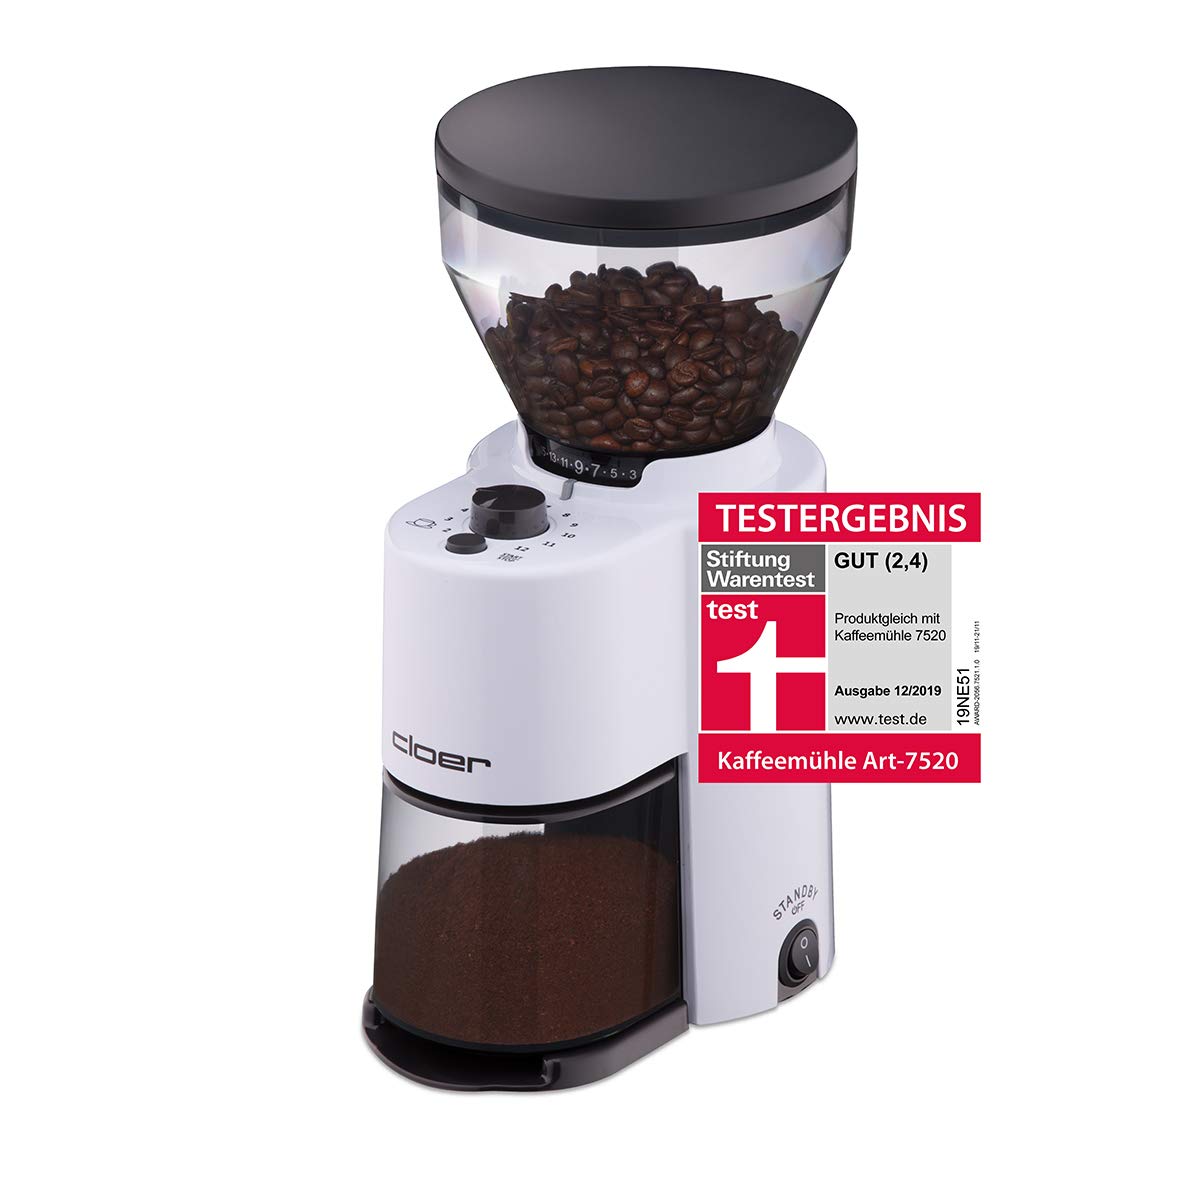 http://honestforwarder.com/uploads/product/eesSPp0ioT-cloer-electric-coffee-grinder-with-conical-grinder-for-2-12-cups-and-300g-coffee-beans-150-w-adjustable-grinding0.jpg